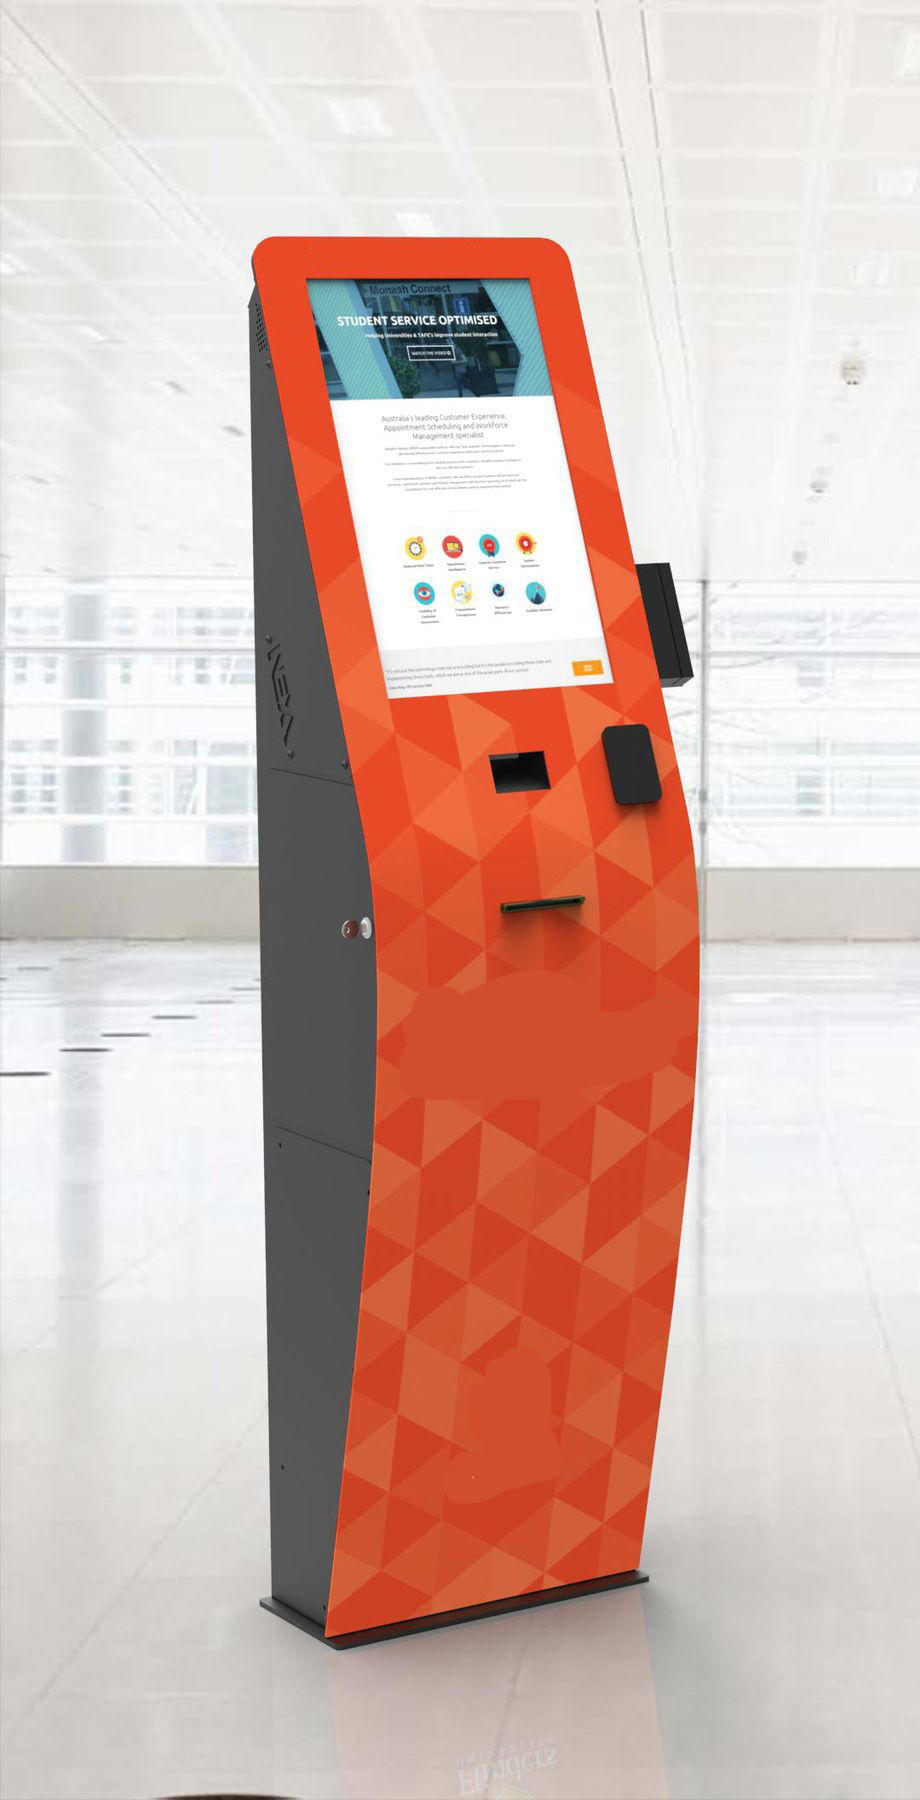 21.5 Inch touch screen foreign currency exchange kiosk with banknote acceptor Shenzhen factory